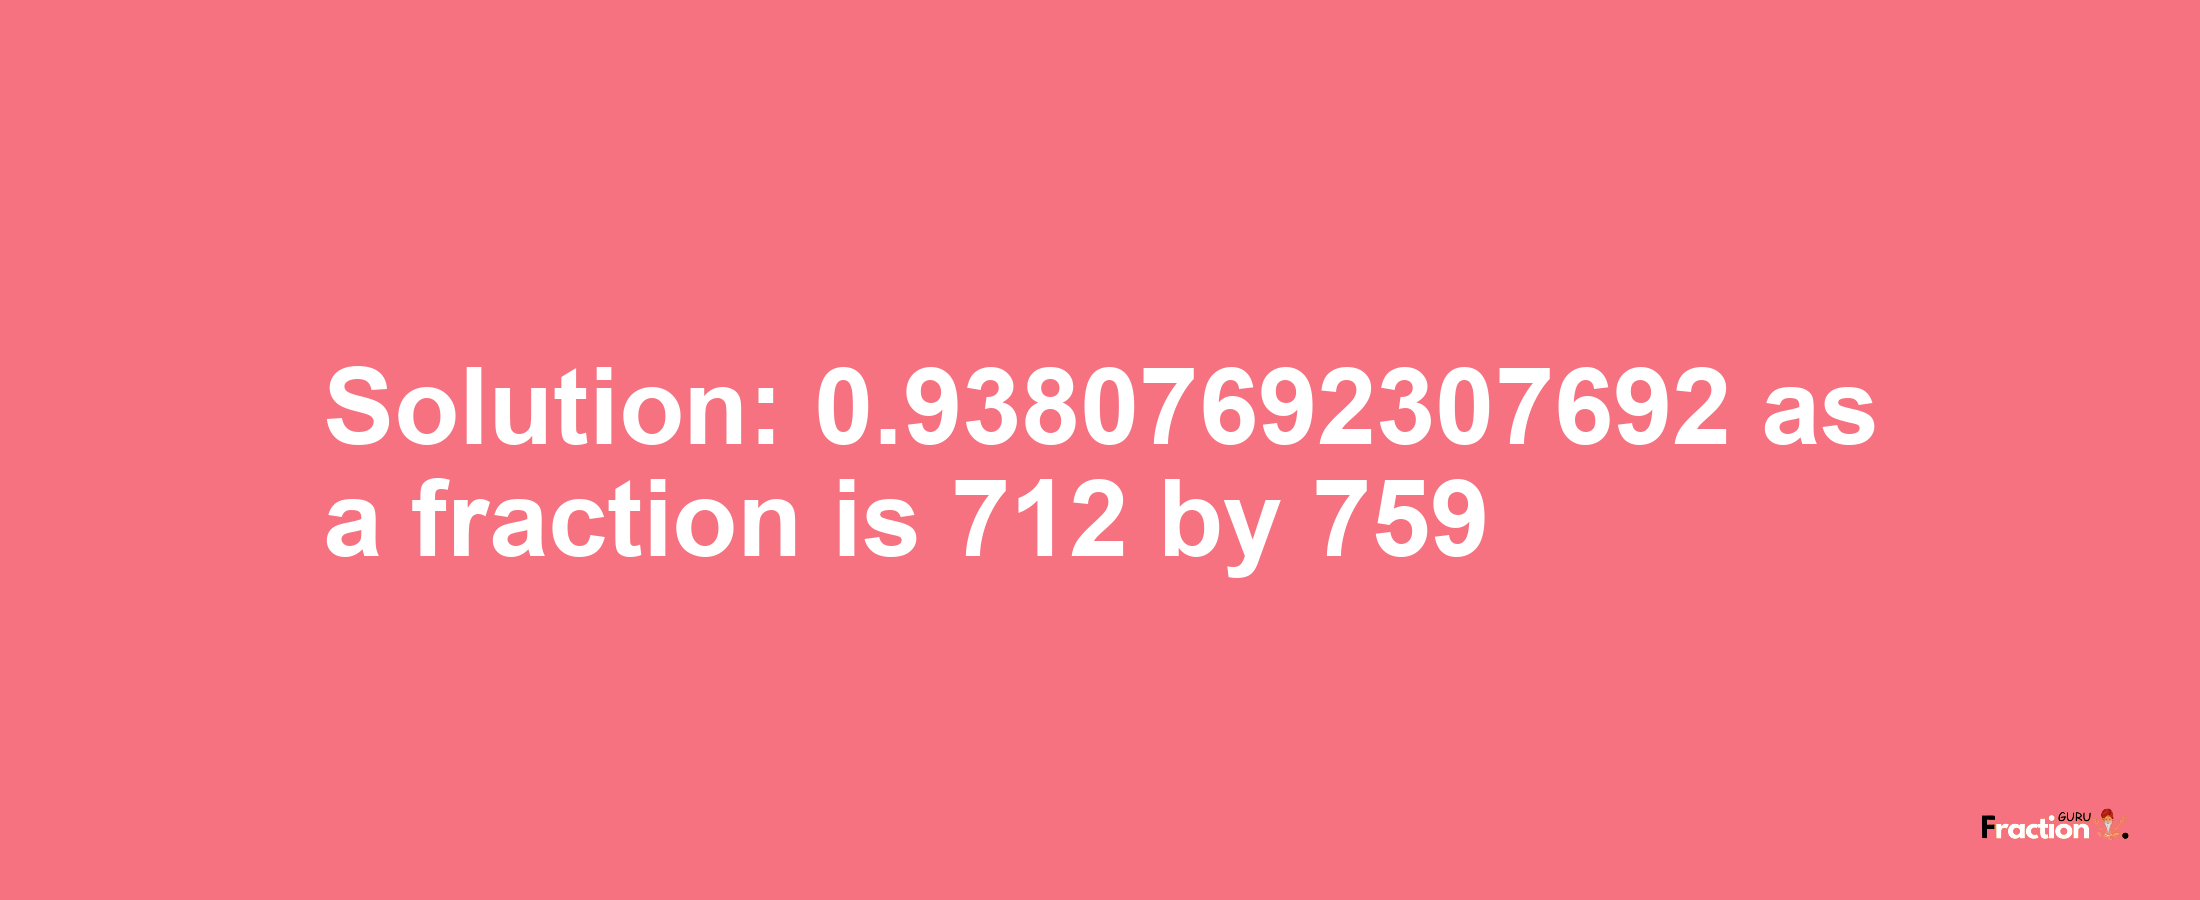 Solution:0.93807692307692 as a fraction is 712/759